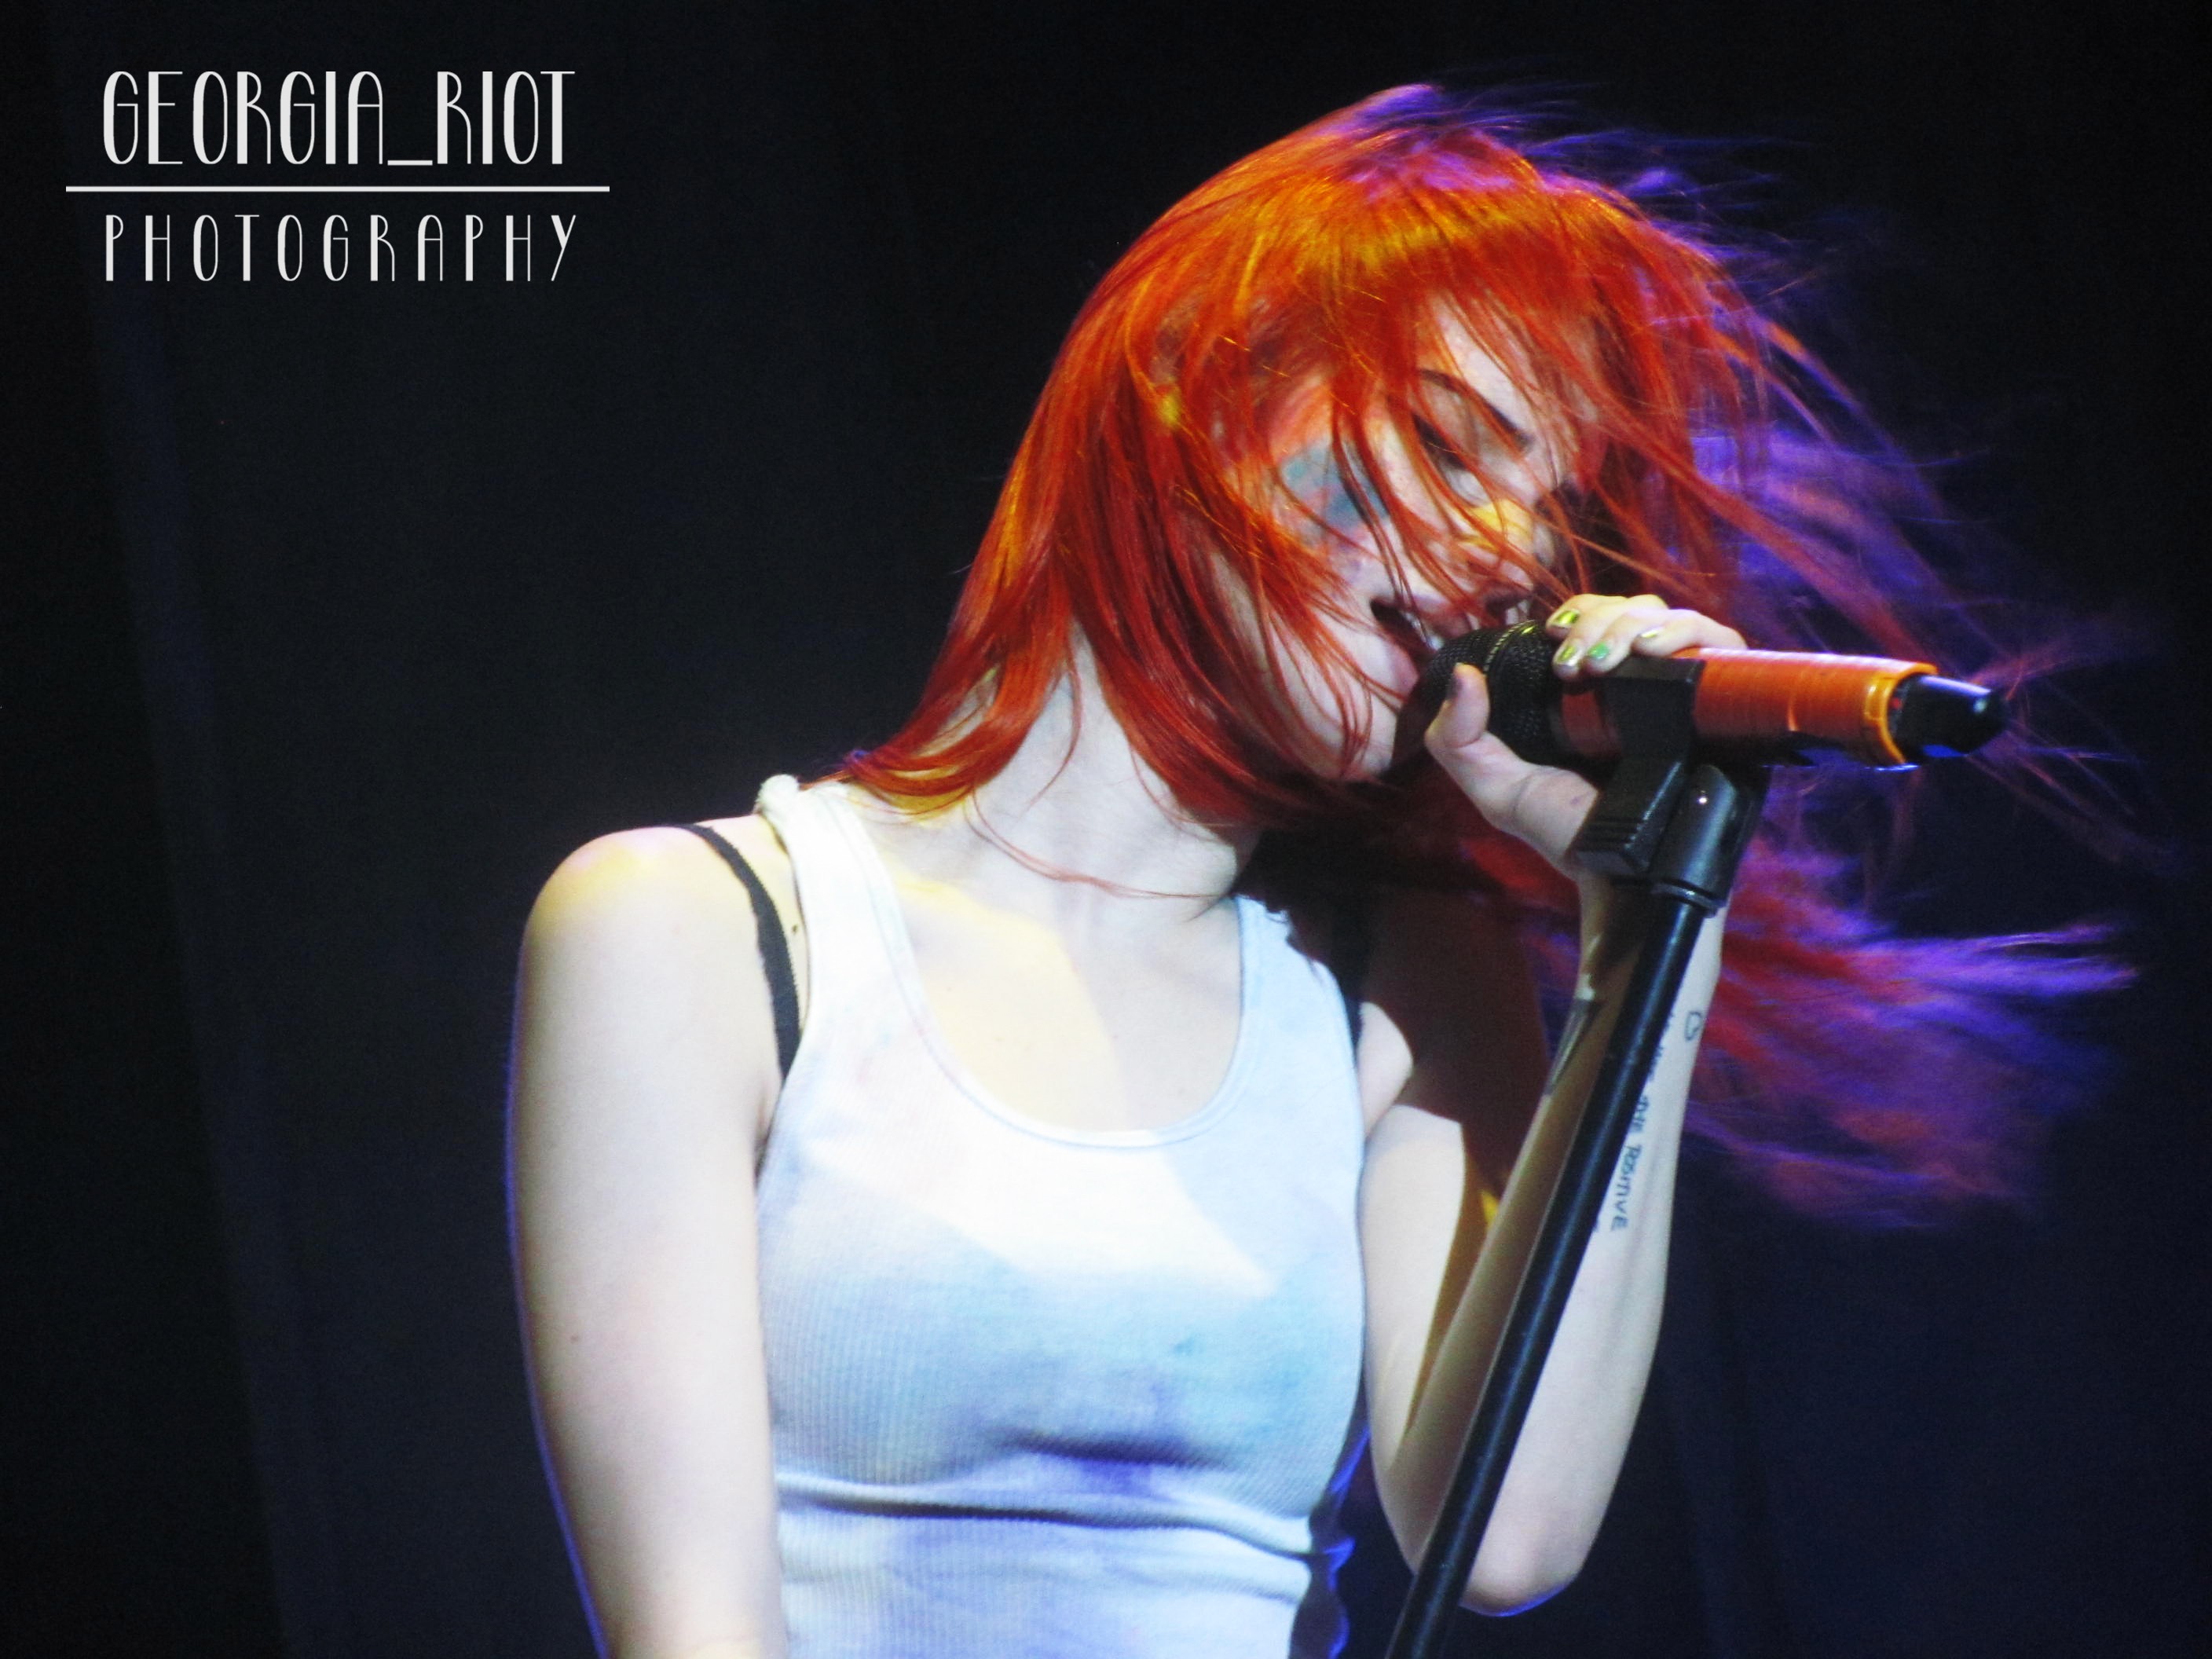 People 2816x2112 women music Hayley Williams Paramore redhead rock bands punk rock alternative rock microphone white tops dyed hair singer watermarked simple background